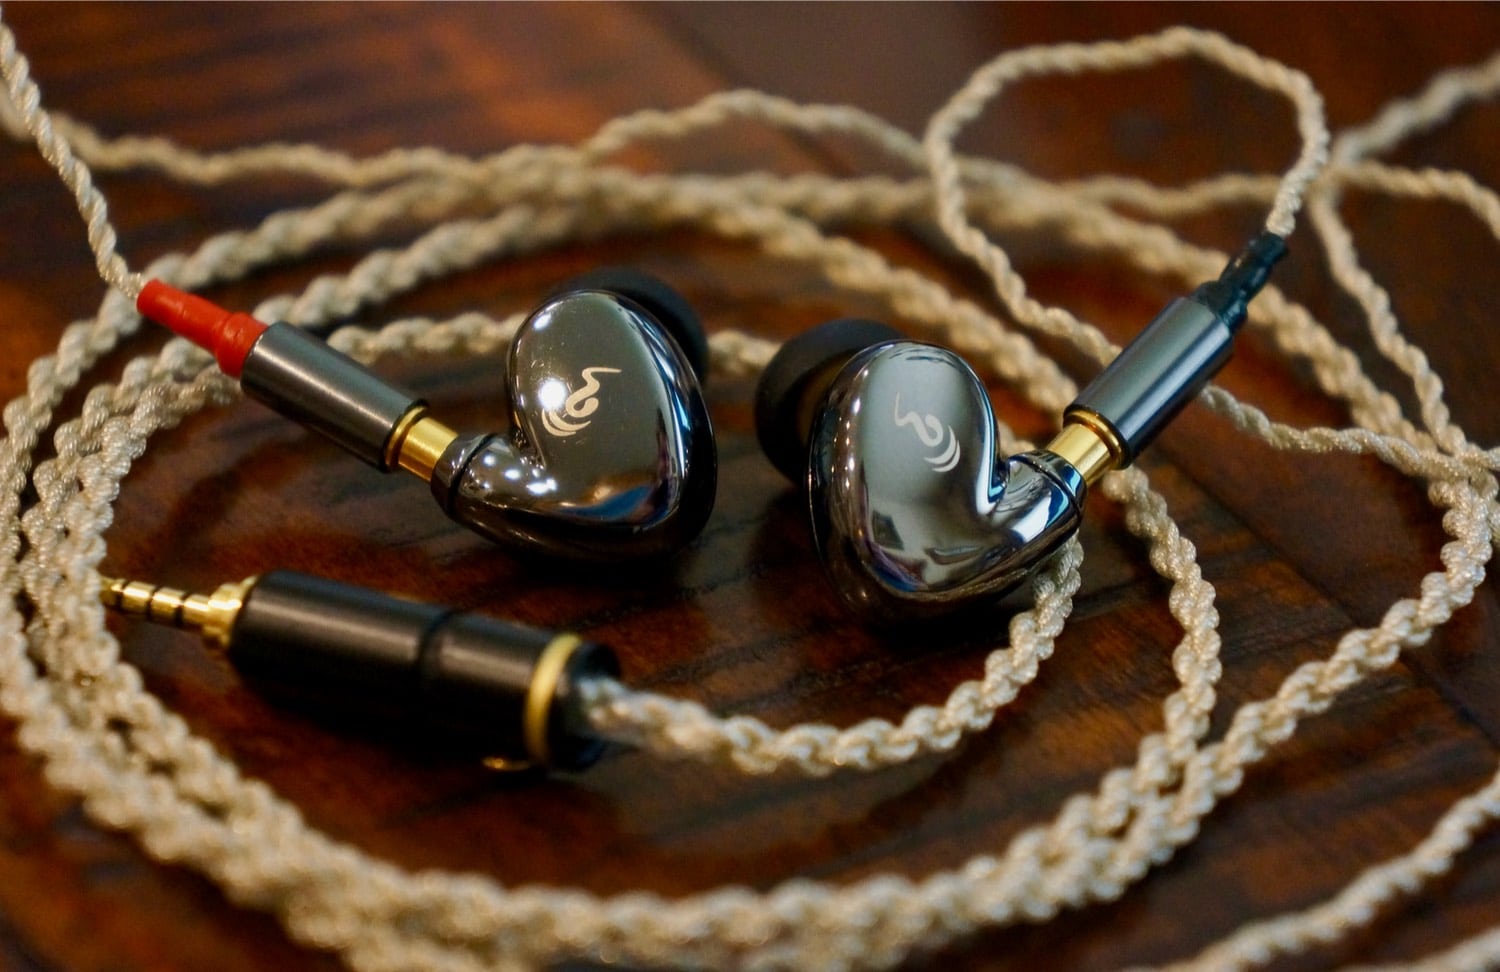 Cupid Planar entry-level earphones from oBravo 